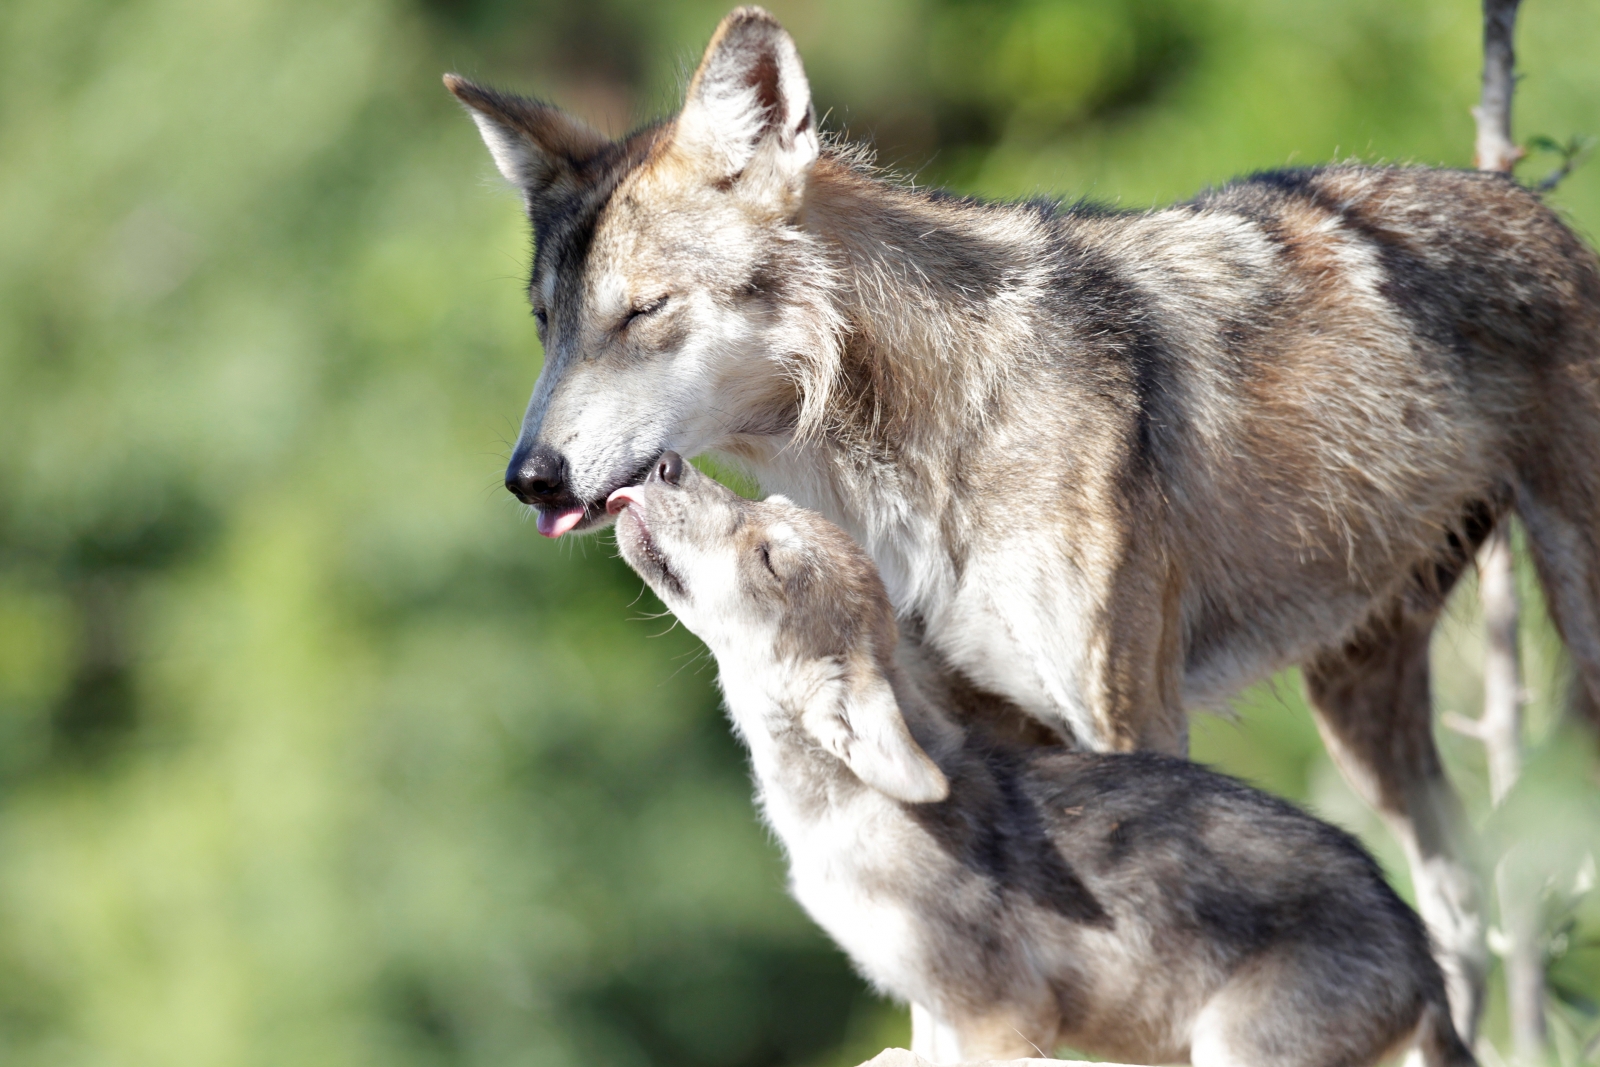 Spanish parents told they cannot name their son 'Wolf'